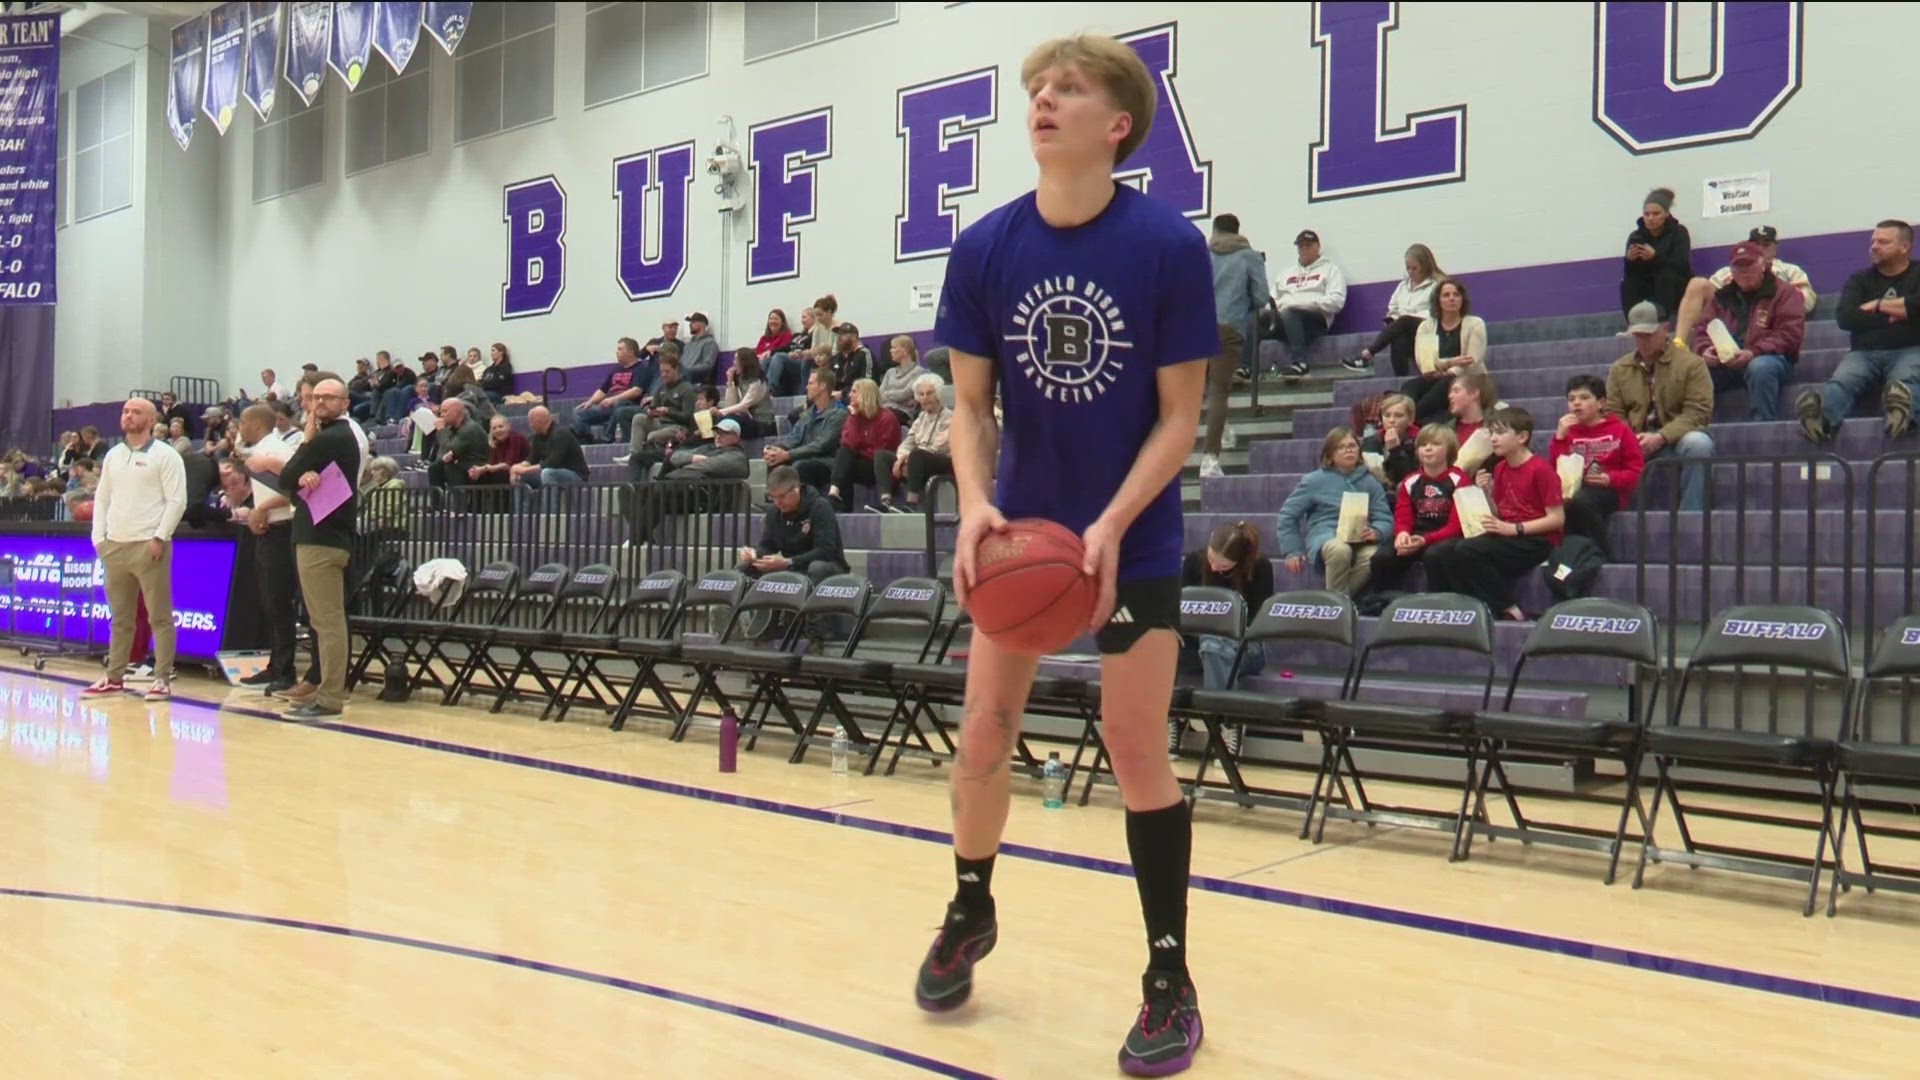 Johnson returned to the court this winter for his senior season with the Buffalo boys basketball team.